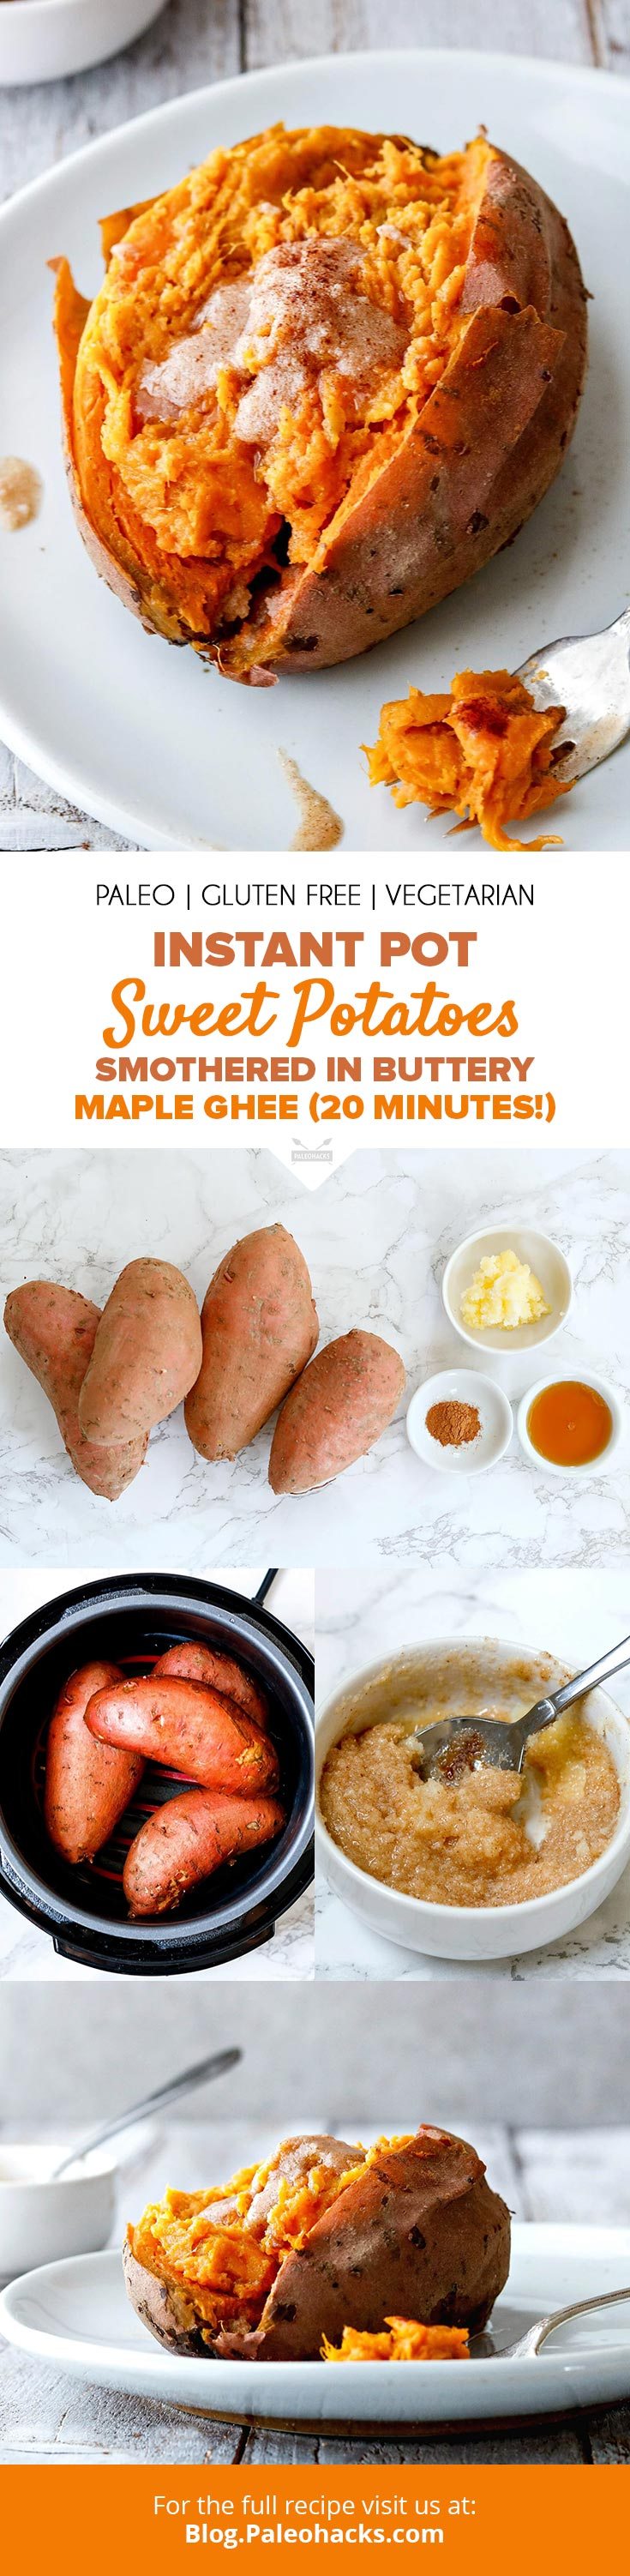 Prepare yourself for Instant Pot magic with these 20-minute sweet potatoes smothered in buttery maple ghee.